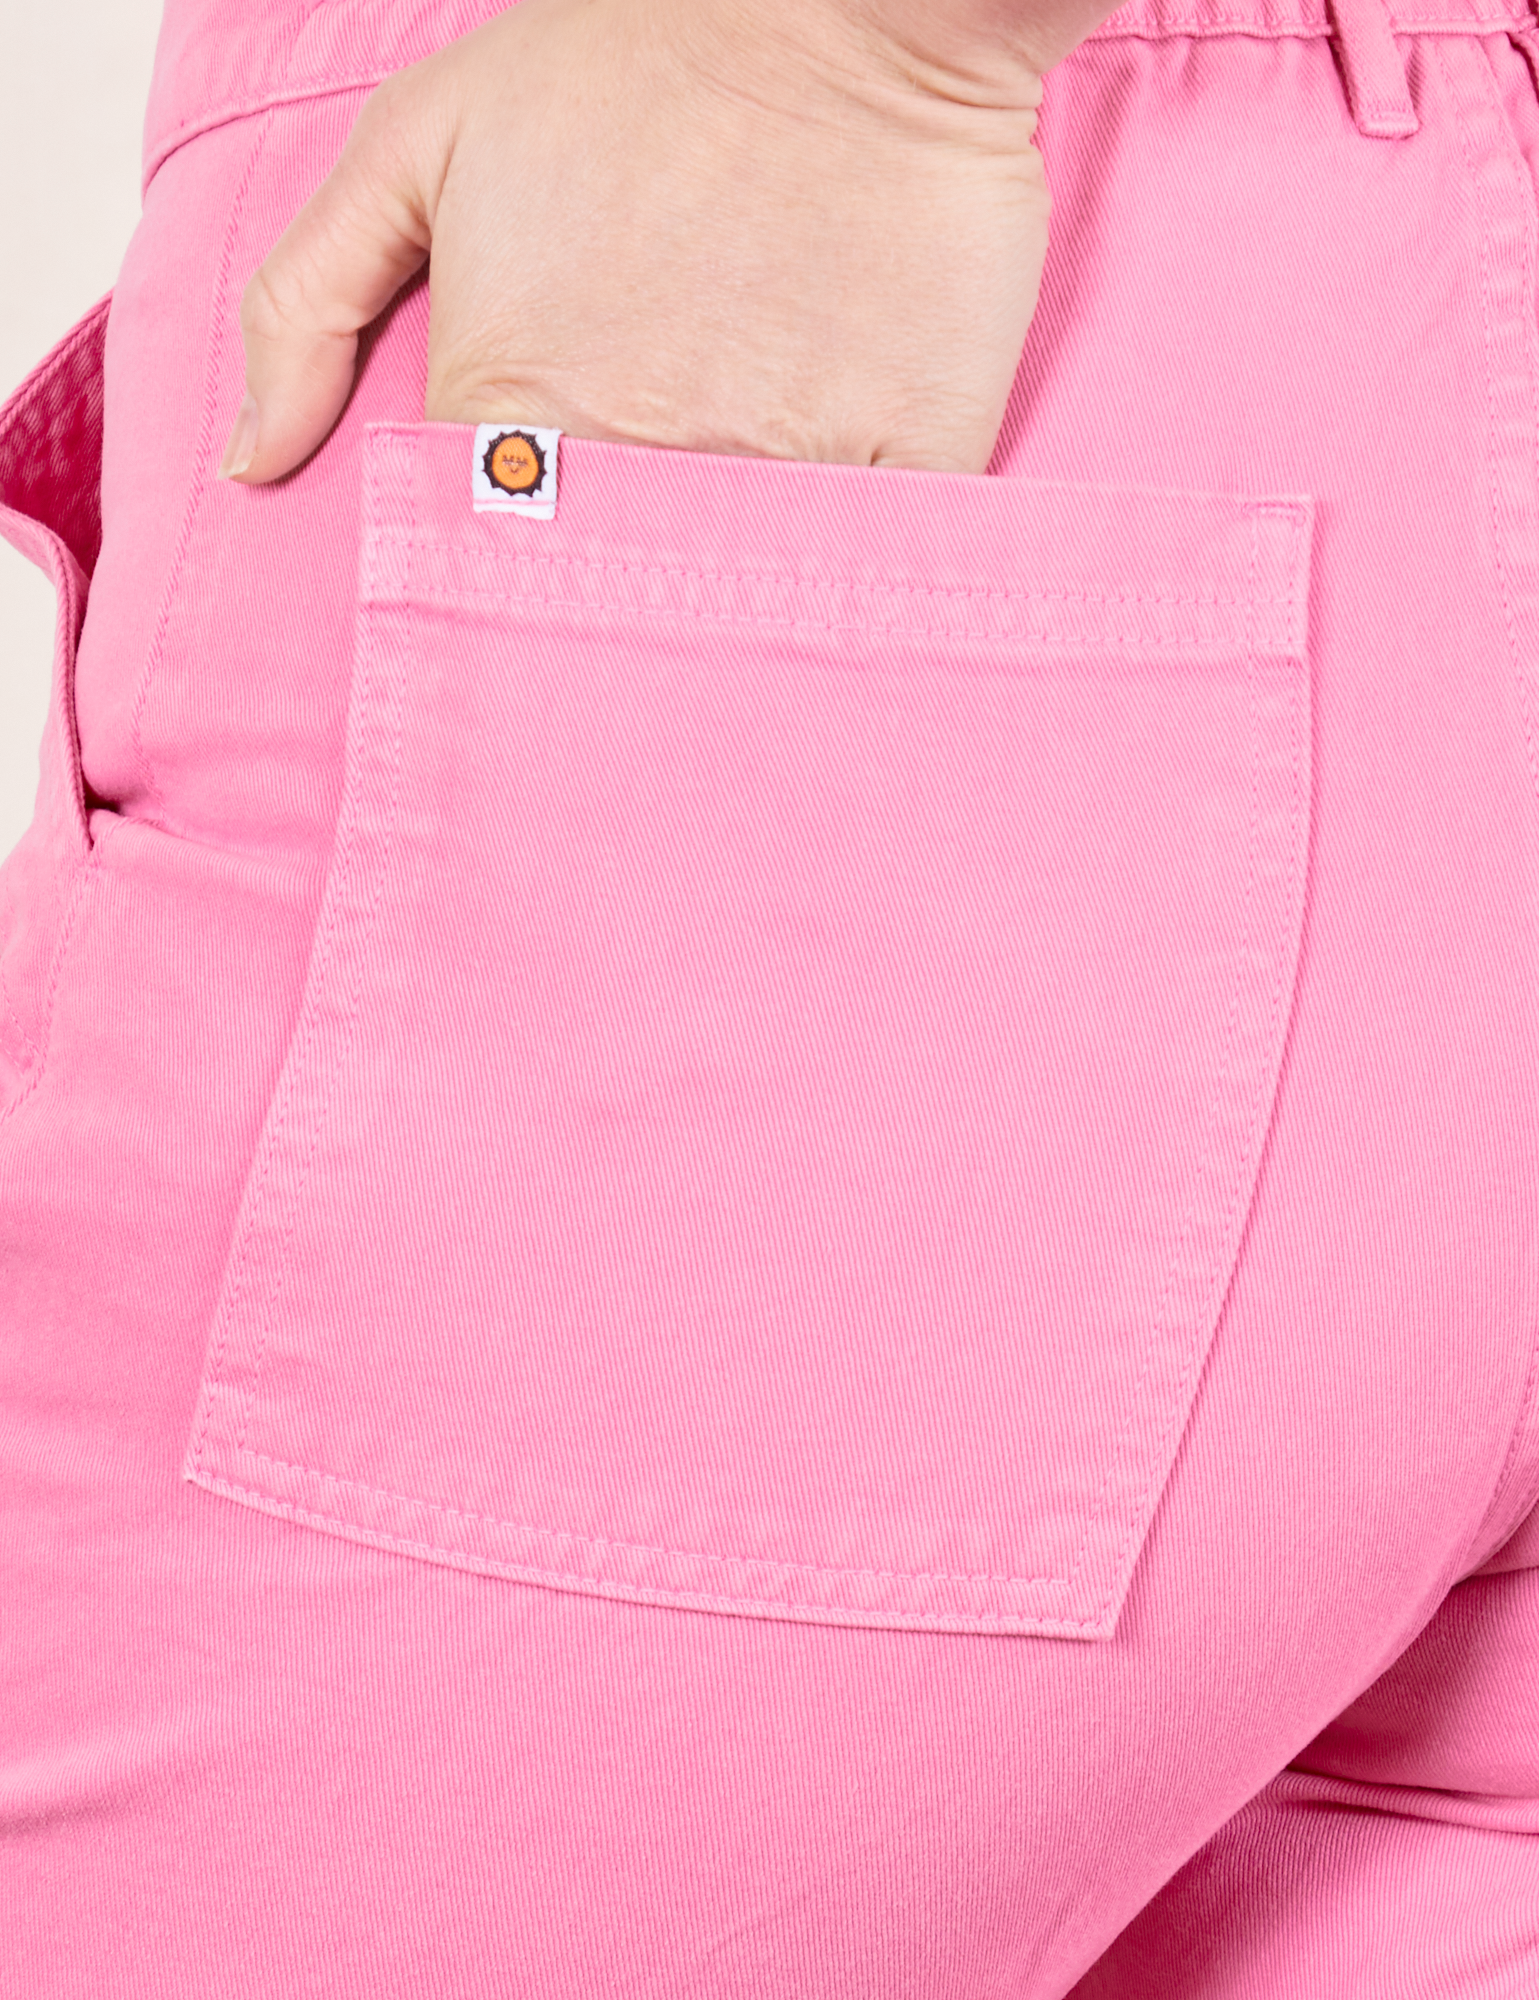 Work Pants in Bubblegum Pink back pocket close up. Worn by Allison with hand in pocket.